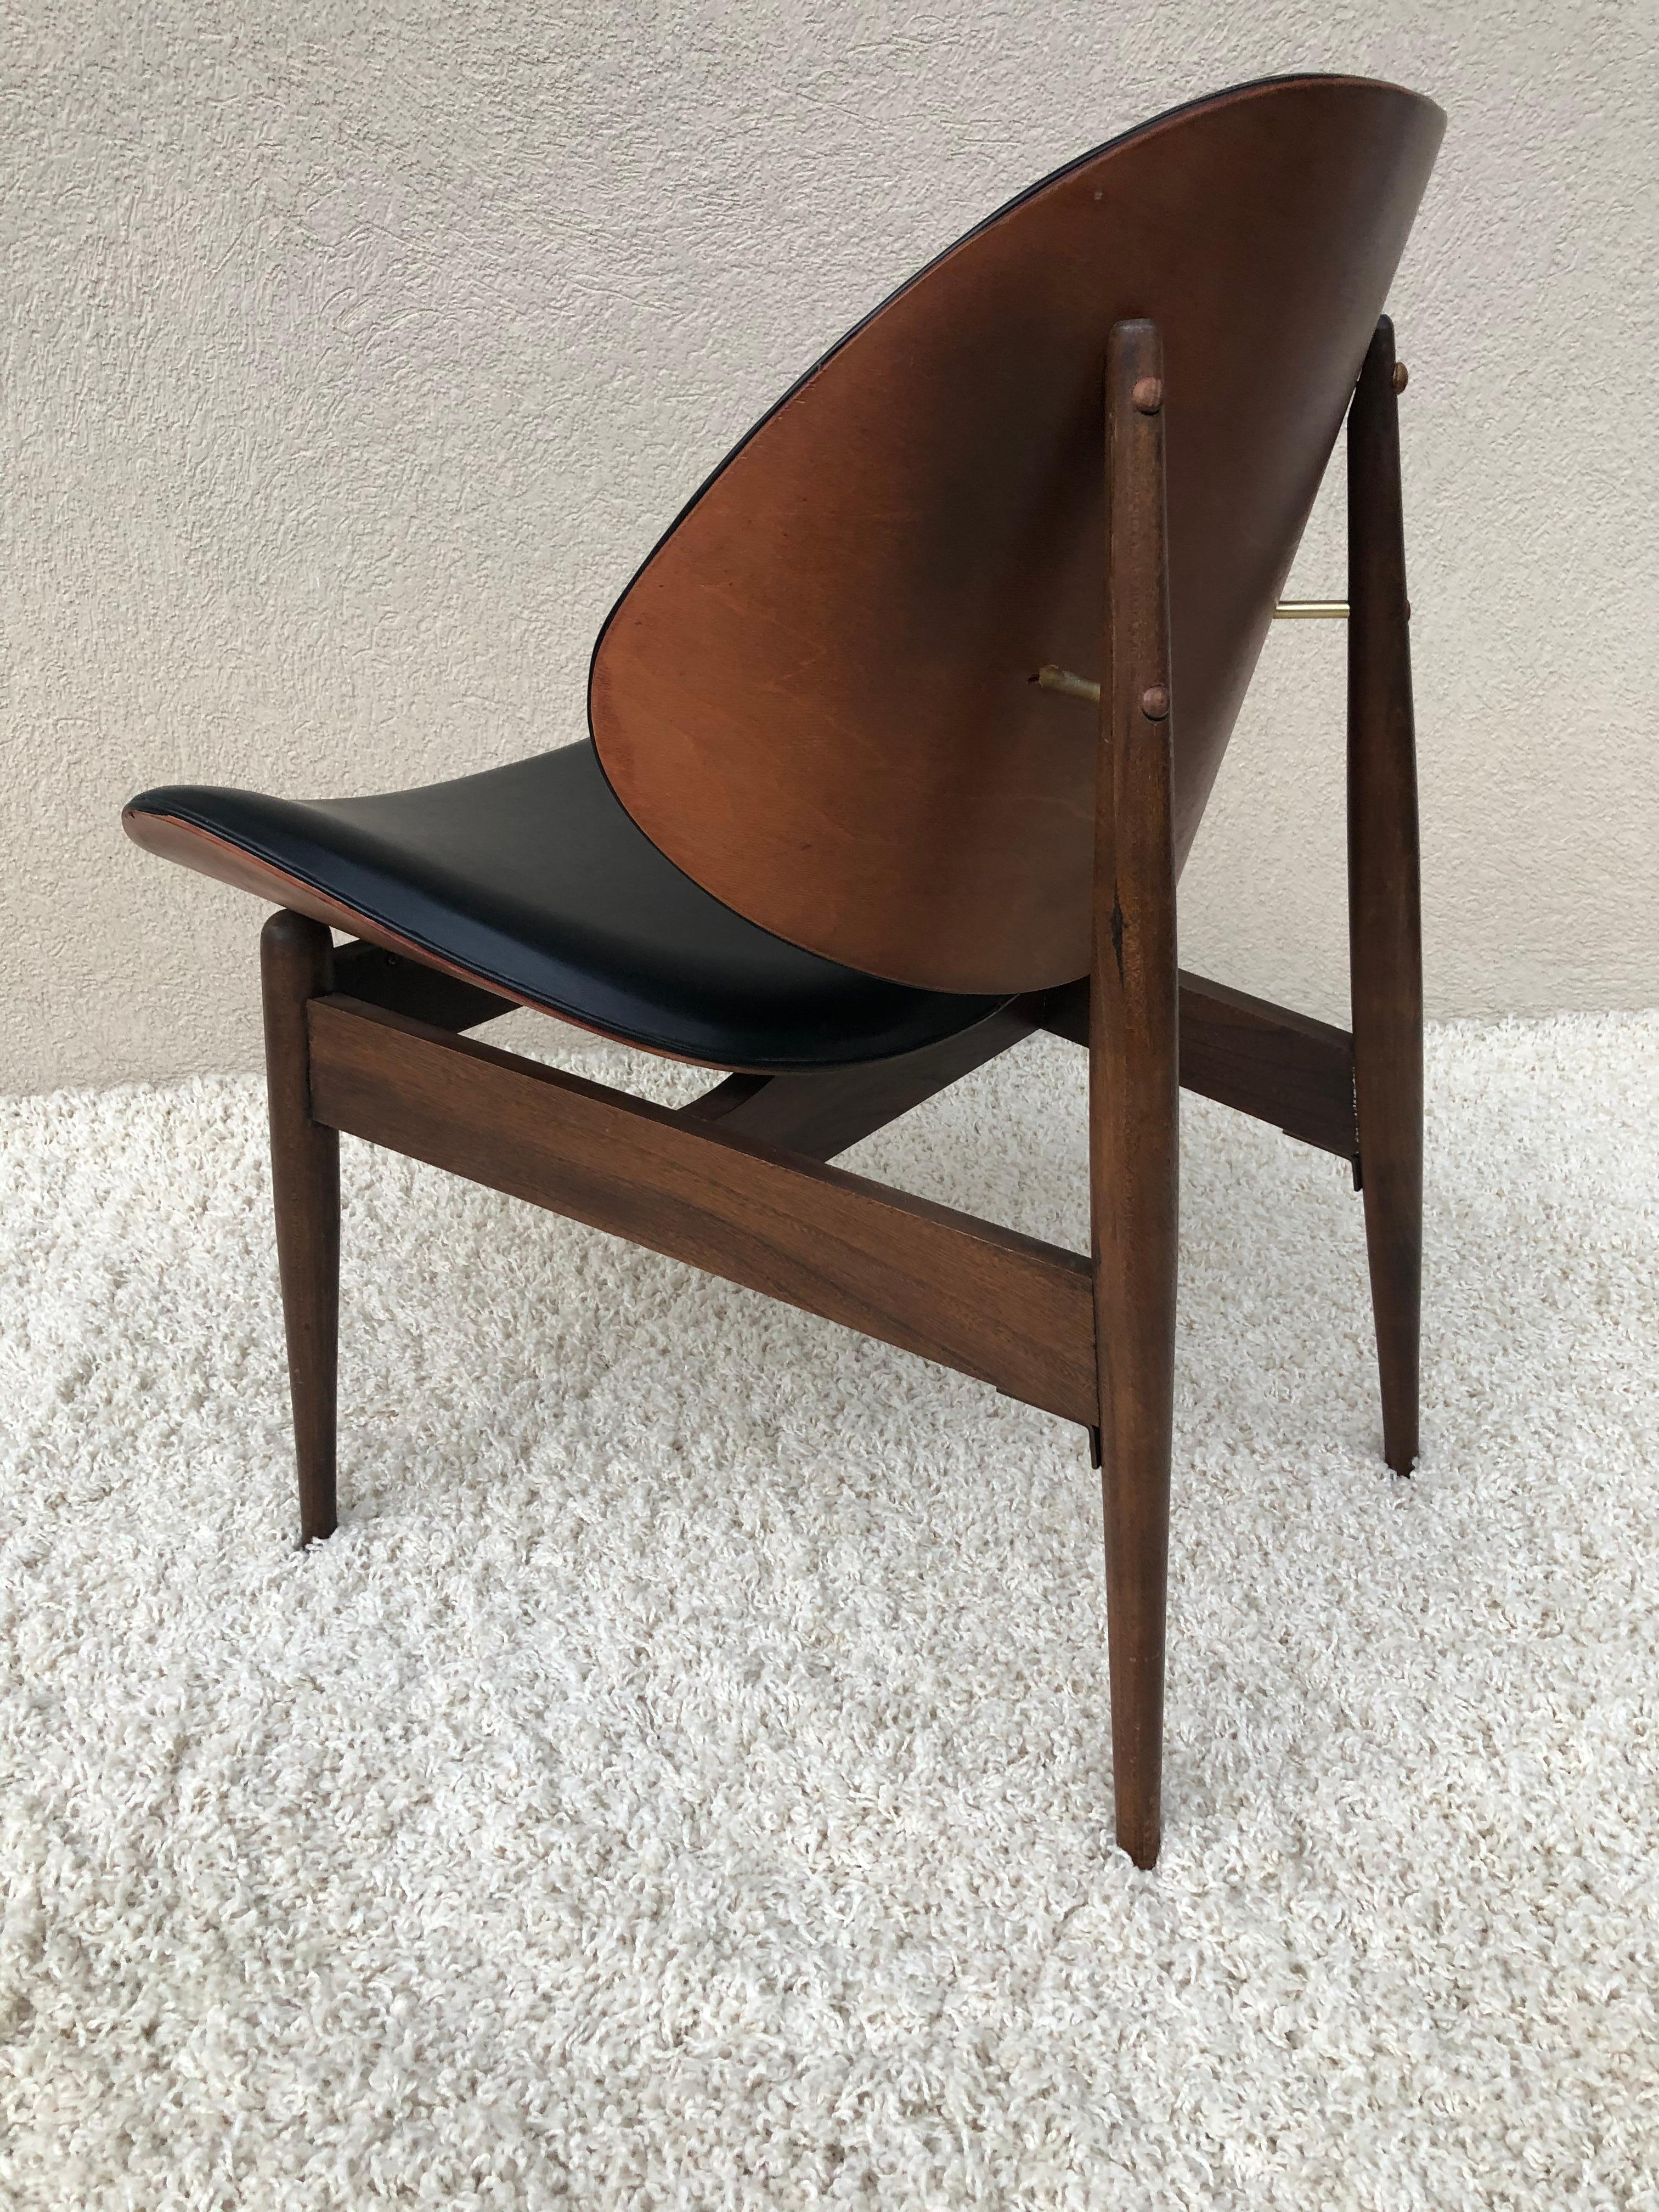 Frank and Son Finn Juhl Style Midcentury Chair In Good Condition In Westport, CT